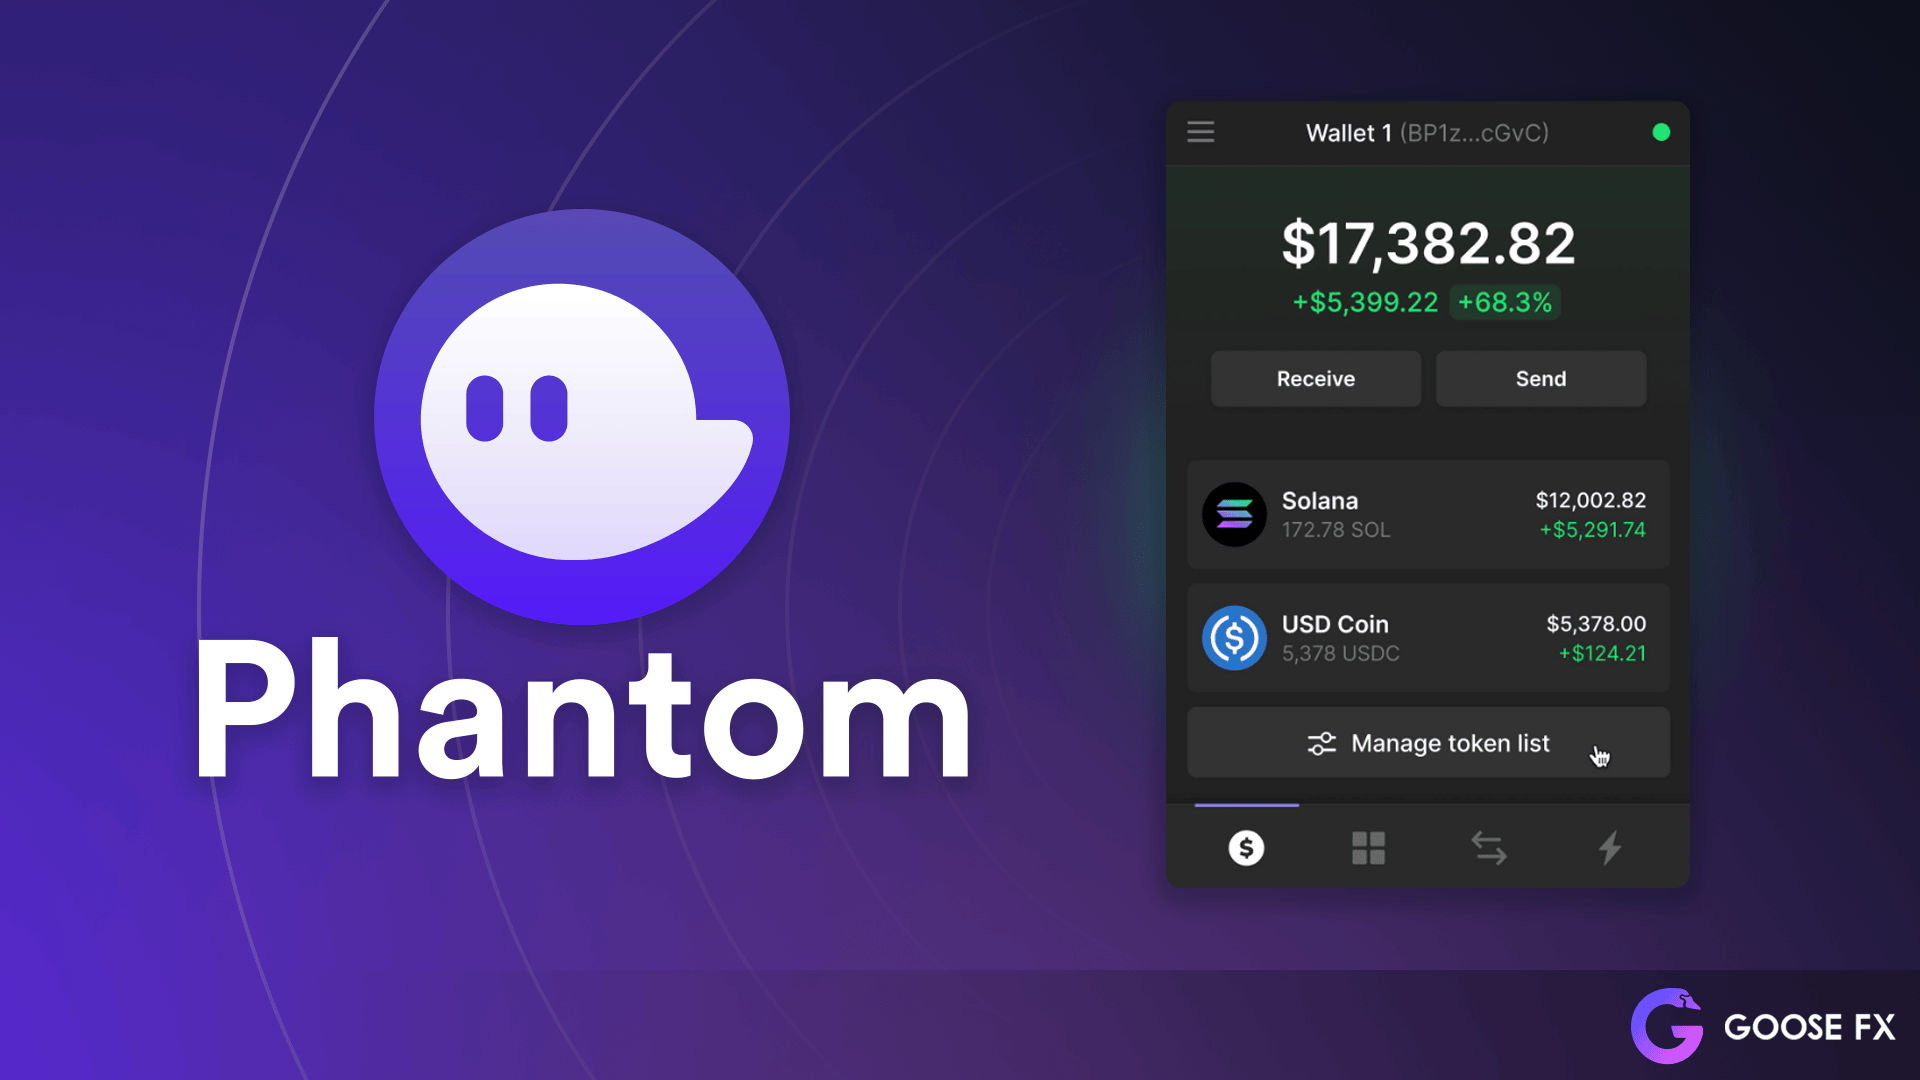 Phantom is one of the top wallets on Solana